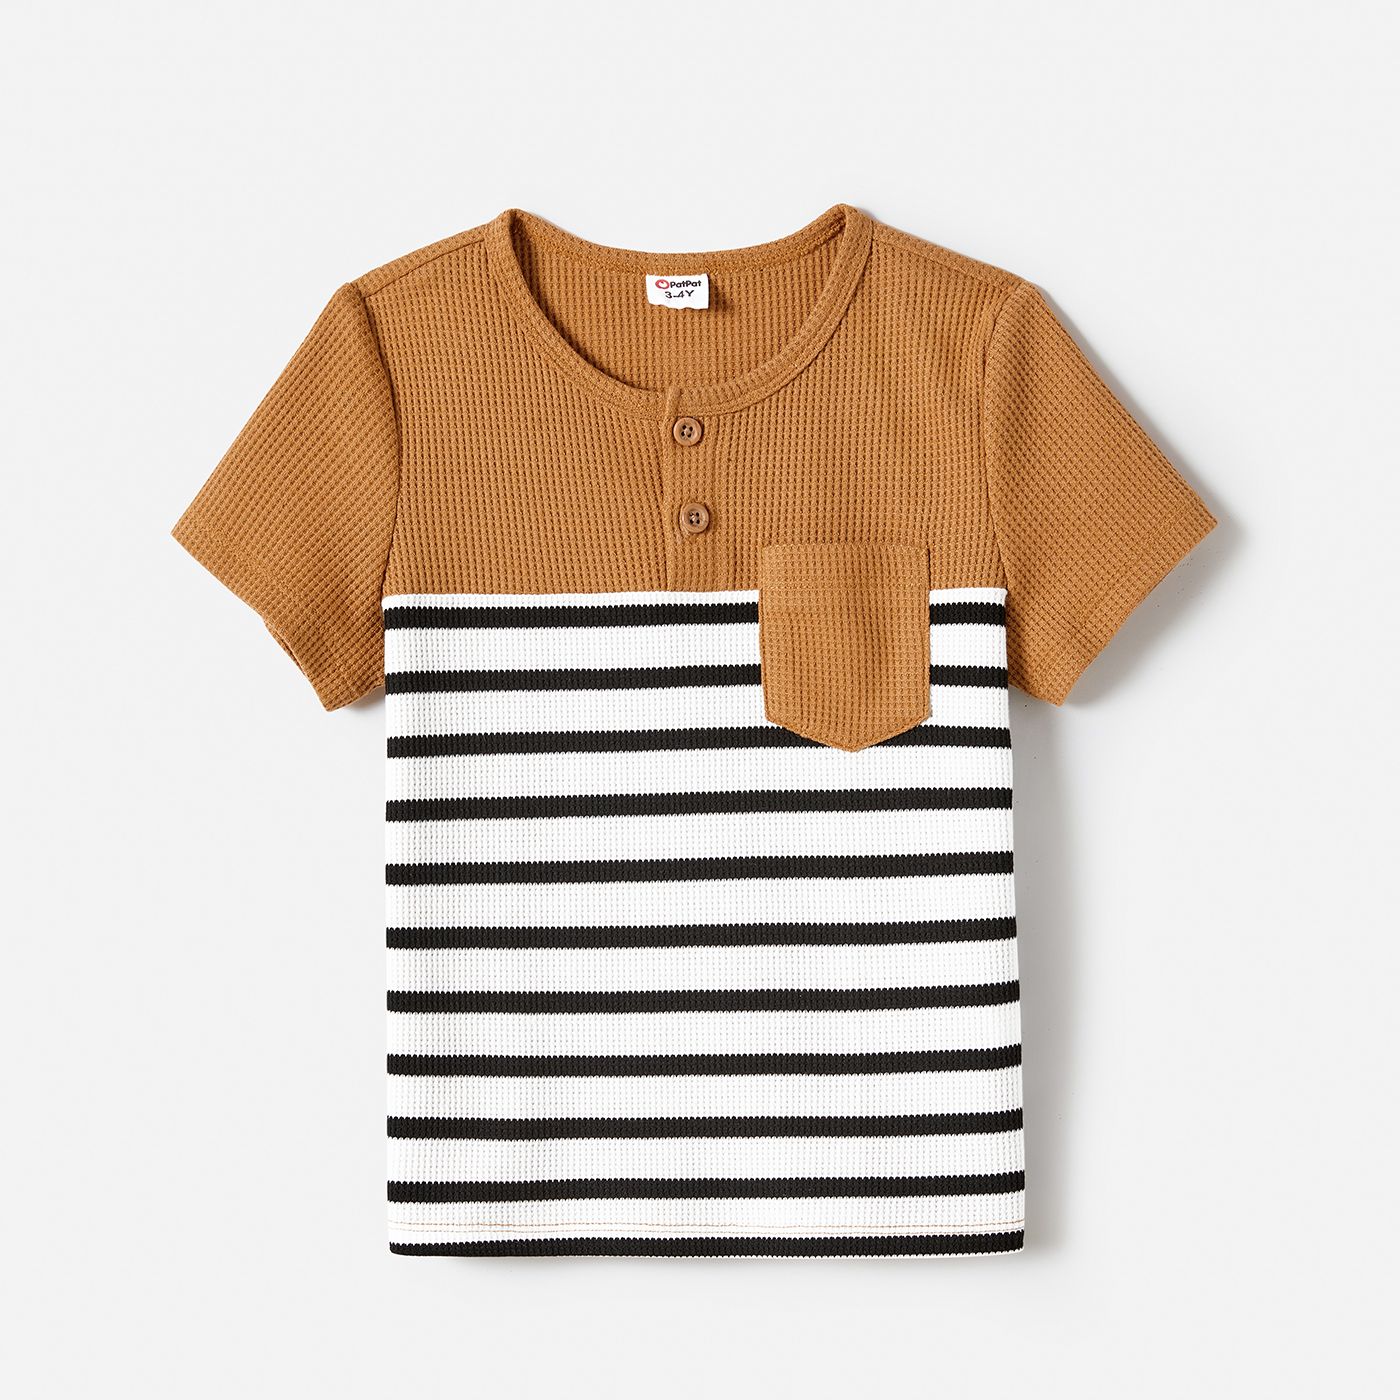 Family Matching Solid Color High Low Hem Dresses And Short Sleeve Striped Colorblock Tops Sets